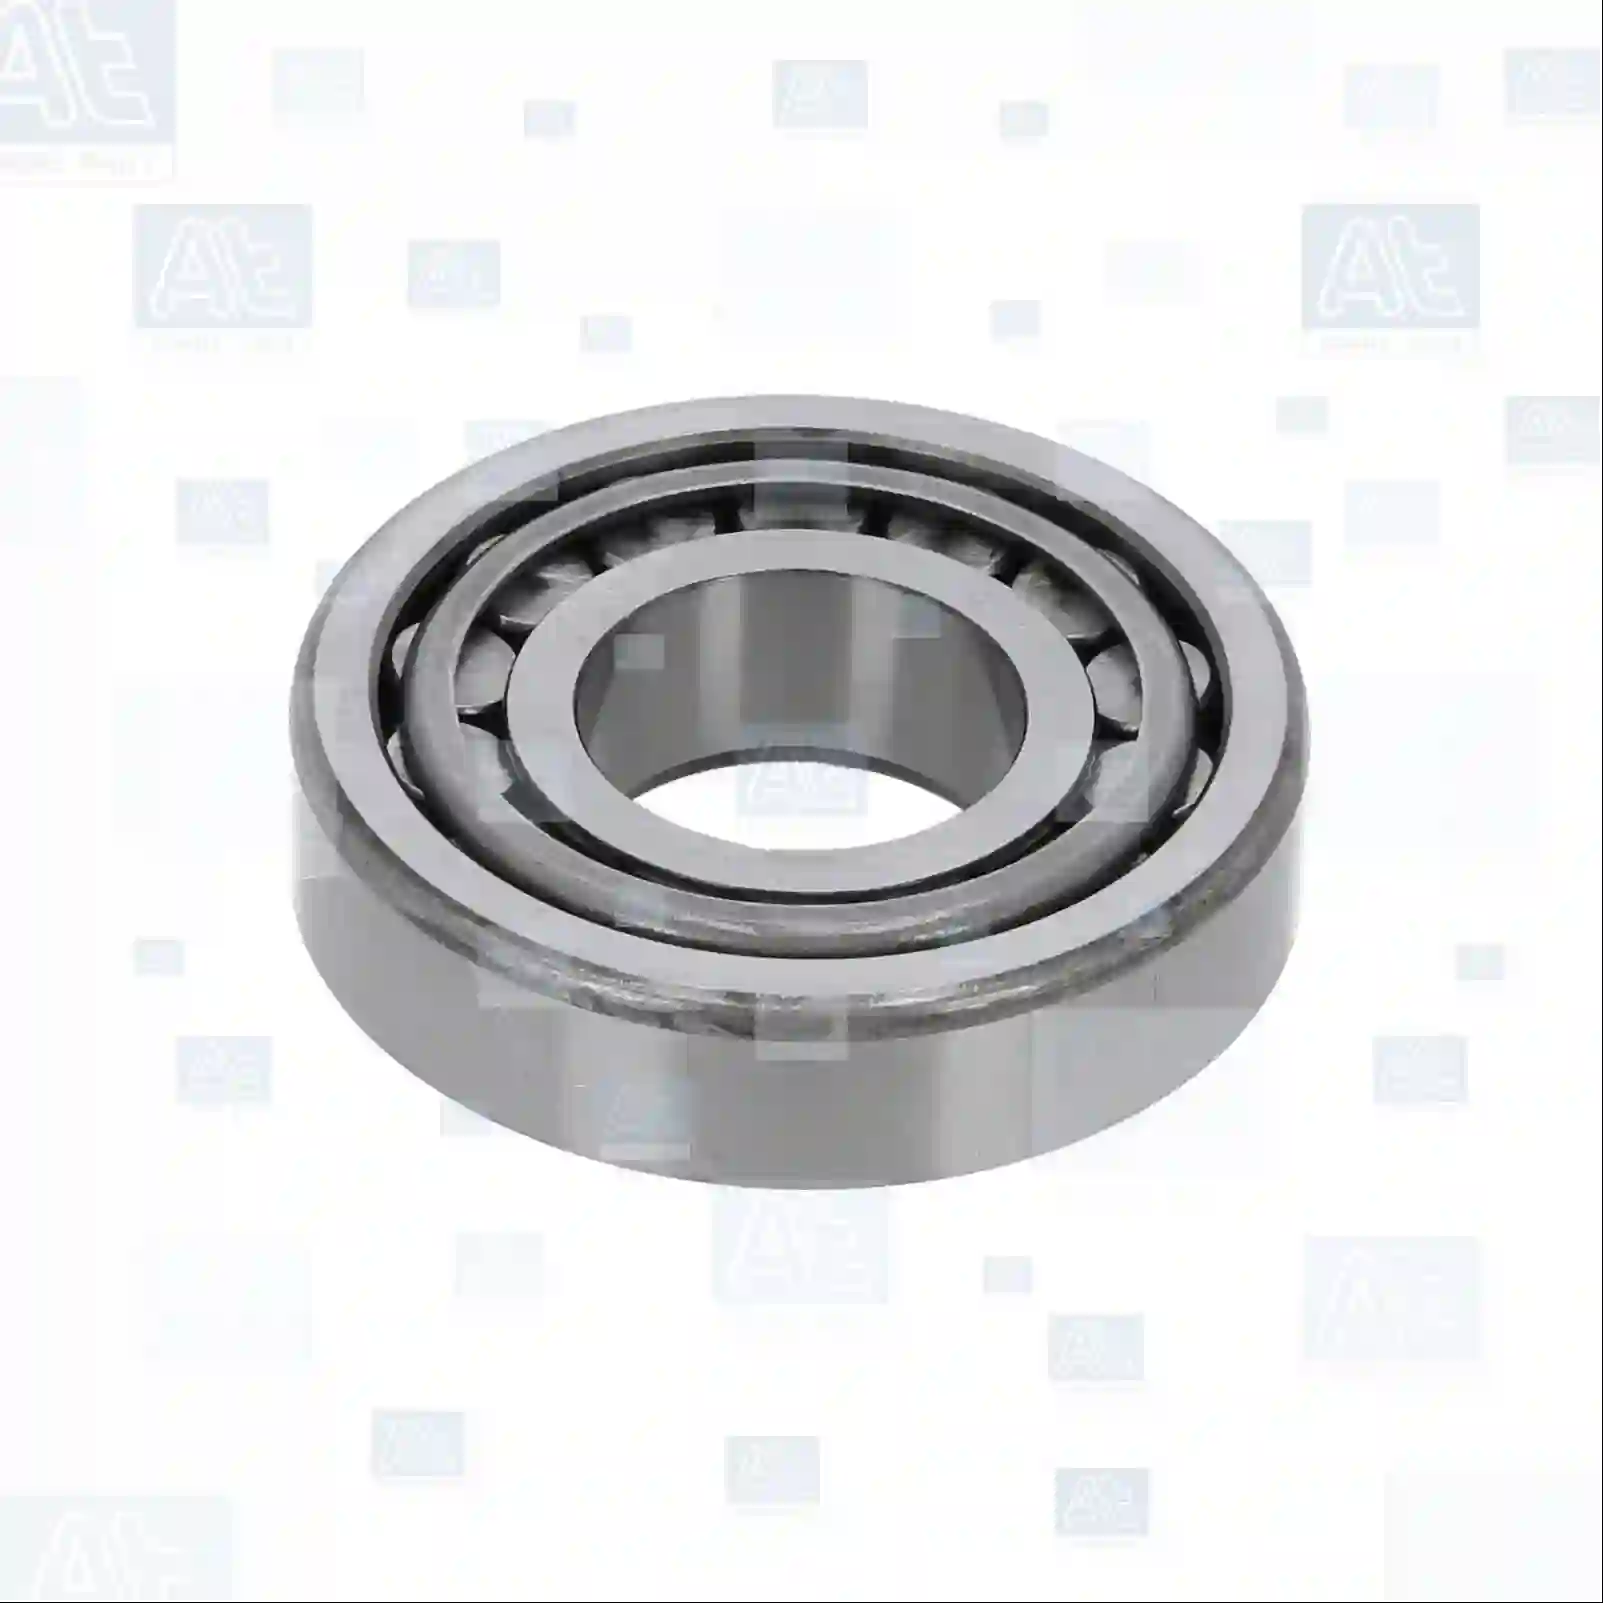 Tapered roller bearing, at no 77726581, oem no: 290062275, 089442, 420439, 620032, 9004366011, 900436601100, 00680035, 26800350, 30185209, 91173001, 91174328, 96057726, 98131432, 8-98131432-0, 00819233, 08850842, 26800350, 00604-27220, 060327141, 060327210, 0169813005, 089442, 420439, 620032, 0007730307, 4200001100, 177801, 09265-35002, 90366-35015, 90366-35032, 97600-30307, 11084, 1111, 183248, 6600738, 7011084, 26800350 At Spare Part | Engine, Accelerator Pedal, Camshaft, Connecting Rod, Crankcase, Crankshaft, Cylinder Head, Engine Suspension Mountings, Exhaust Manifold, Exhaust Gas Recirculation, Filter Kits, Flywheel Housing, General Overhaul Kits, Engine, Intake Manifold, Oil Cleaner, Oil Cooler, Oil Filter, Oil Pump, Oil Sump, Piston & Liner, Sensor & Switch, Timing Case, Turbocharger, Cooling System, Belt Tensioner, Coolant Filter, Coolant Pipe, Corrosion Prevention Agent, Drive, Expansion Tank, Fan, Intercooler, Monitors & Gauges, Radiator, Thermostat, V-Belt / Timing belt, Water Pump, Fuel System, Electronical Injector Unit, Feed Pump, Fuel Filter, cpl., Fuel Gauge Sender,  Fuel Line, Fuel Pump, Fuel Tank, Injection Line Kit, Injection Pump, Exhaust System, Clutch & Pedal, Gearbox, Propeller Shaft, Axles, Brake System, Hubs & Wheels, Suspension, Leaf Spring, Universal Parts / Accessories, Steering, Electrical System, Cabin Tapered roller bearing, at no 77726581, oem no: 290062275, 089442, 420439, 620032, 9004366011, 900436601100, 00680035, 26800350, 30185209, 91173001, 91174328, 96057726, 98131432, 8-98131432-0, 00819233, 08850842, 26800350, 00604-27220, 060327141, 060327210, 0169813005, 089442, 420439, 620032, 0007730307, 4200001100, 177801, 09265-35002, 90366-35015, 90366-35032, 97600-30307, 11084, 1111, 183248, 6600738, 7011084, 26800350 At Spare Part | Engine, Accelerator Pedal, Camshaft, Connecting Rod, Crankcase, Crankshaft, Cylinder Head, Engine Suspension Mountings, Exhaust Manifold, Exhaust Gas Recirculation, Filter Kits, Flywheel Housing, General Overhaul Kits, Engine, Intake Manifold, Oil Cleaner, Oil Cooler, Oil Filter, Oil Pump, Oil Sump, Piston & Liner, Sensor & Switch, Timing Case, Turbocharger, Cooling System, Belt Tensioner, Coolant Filter, Coolant Pipe, Corrosion Prevention Agent, Drive, Expansion Tank, Fan, Intercooler, Monitors & Gauges, Radiator, Thermostat, V-Belt / Timing belt, Water Pump, Fuel System, Electronical Injector Unit, Feed Pump, Fuel Filter, cpl., Fuel Gauge Sender,  Fuel Line, Fuel Pump, Fuel Tank, Injection Line Kit, Injection Pump, Exhaust System, Clutch & Pedal, Gearbox, Propeller Shaft, Axles, Brake System, Hubs & Wheels, Suspension, Leaf Spring, Universal Parts / Accessories, Steering, Electrical System, Cabin